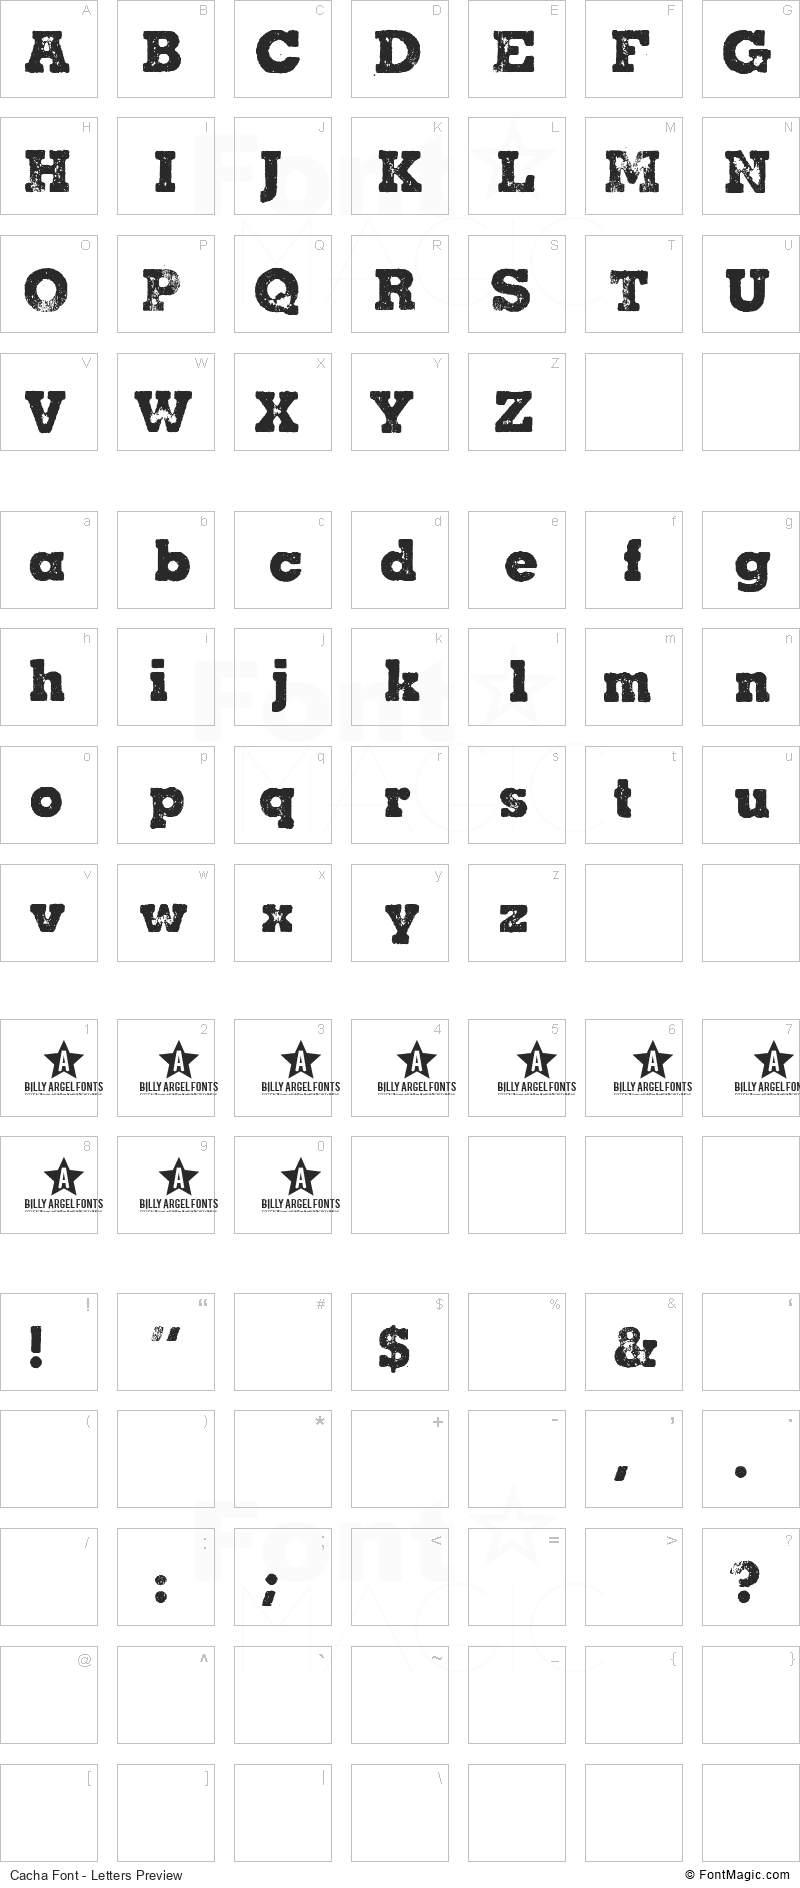 Cacha Font - All Latters Preview Chart